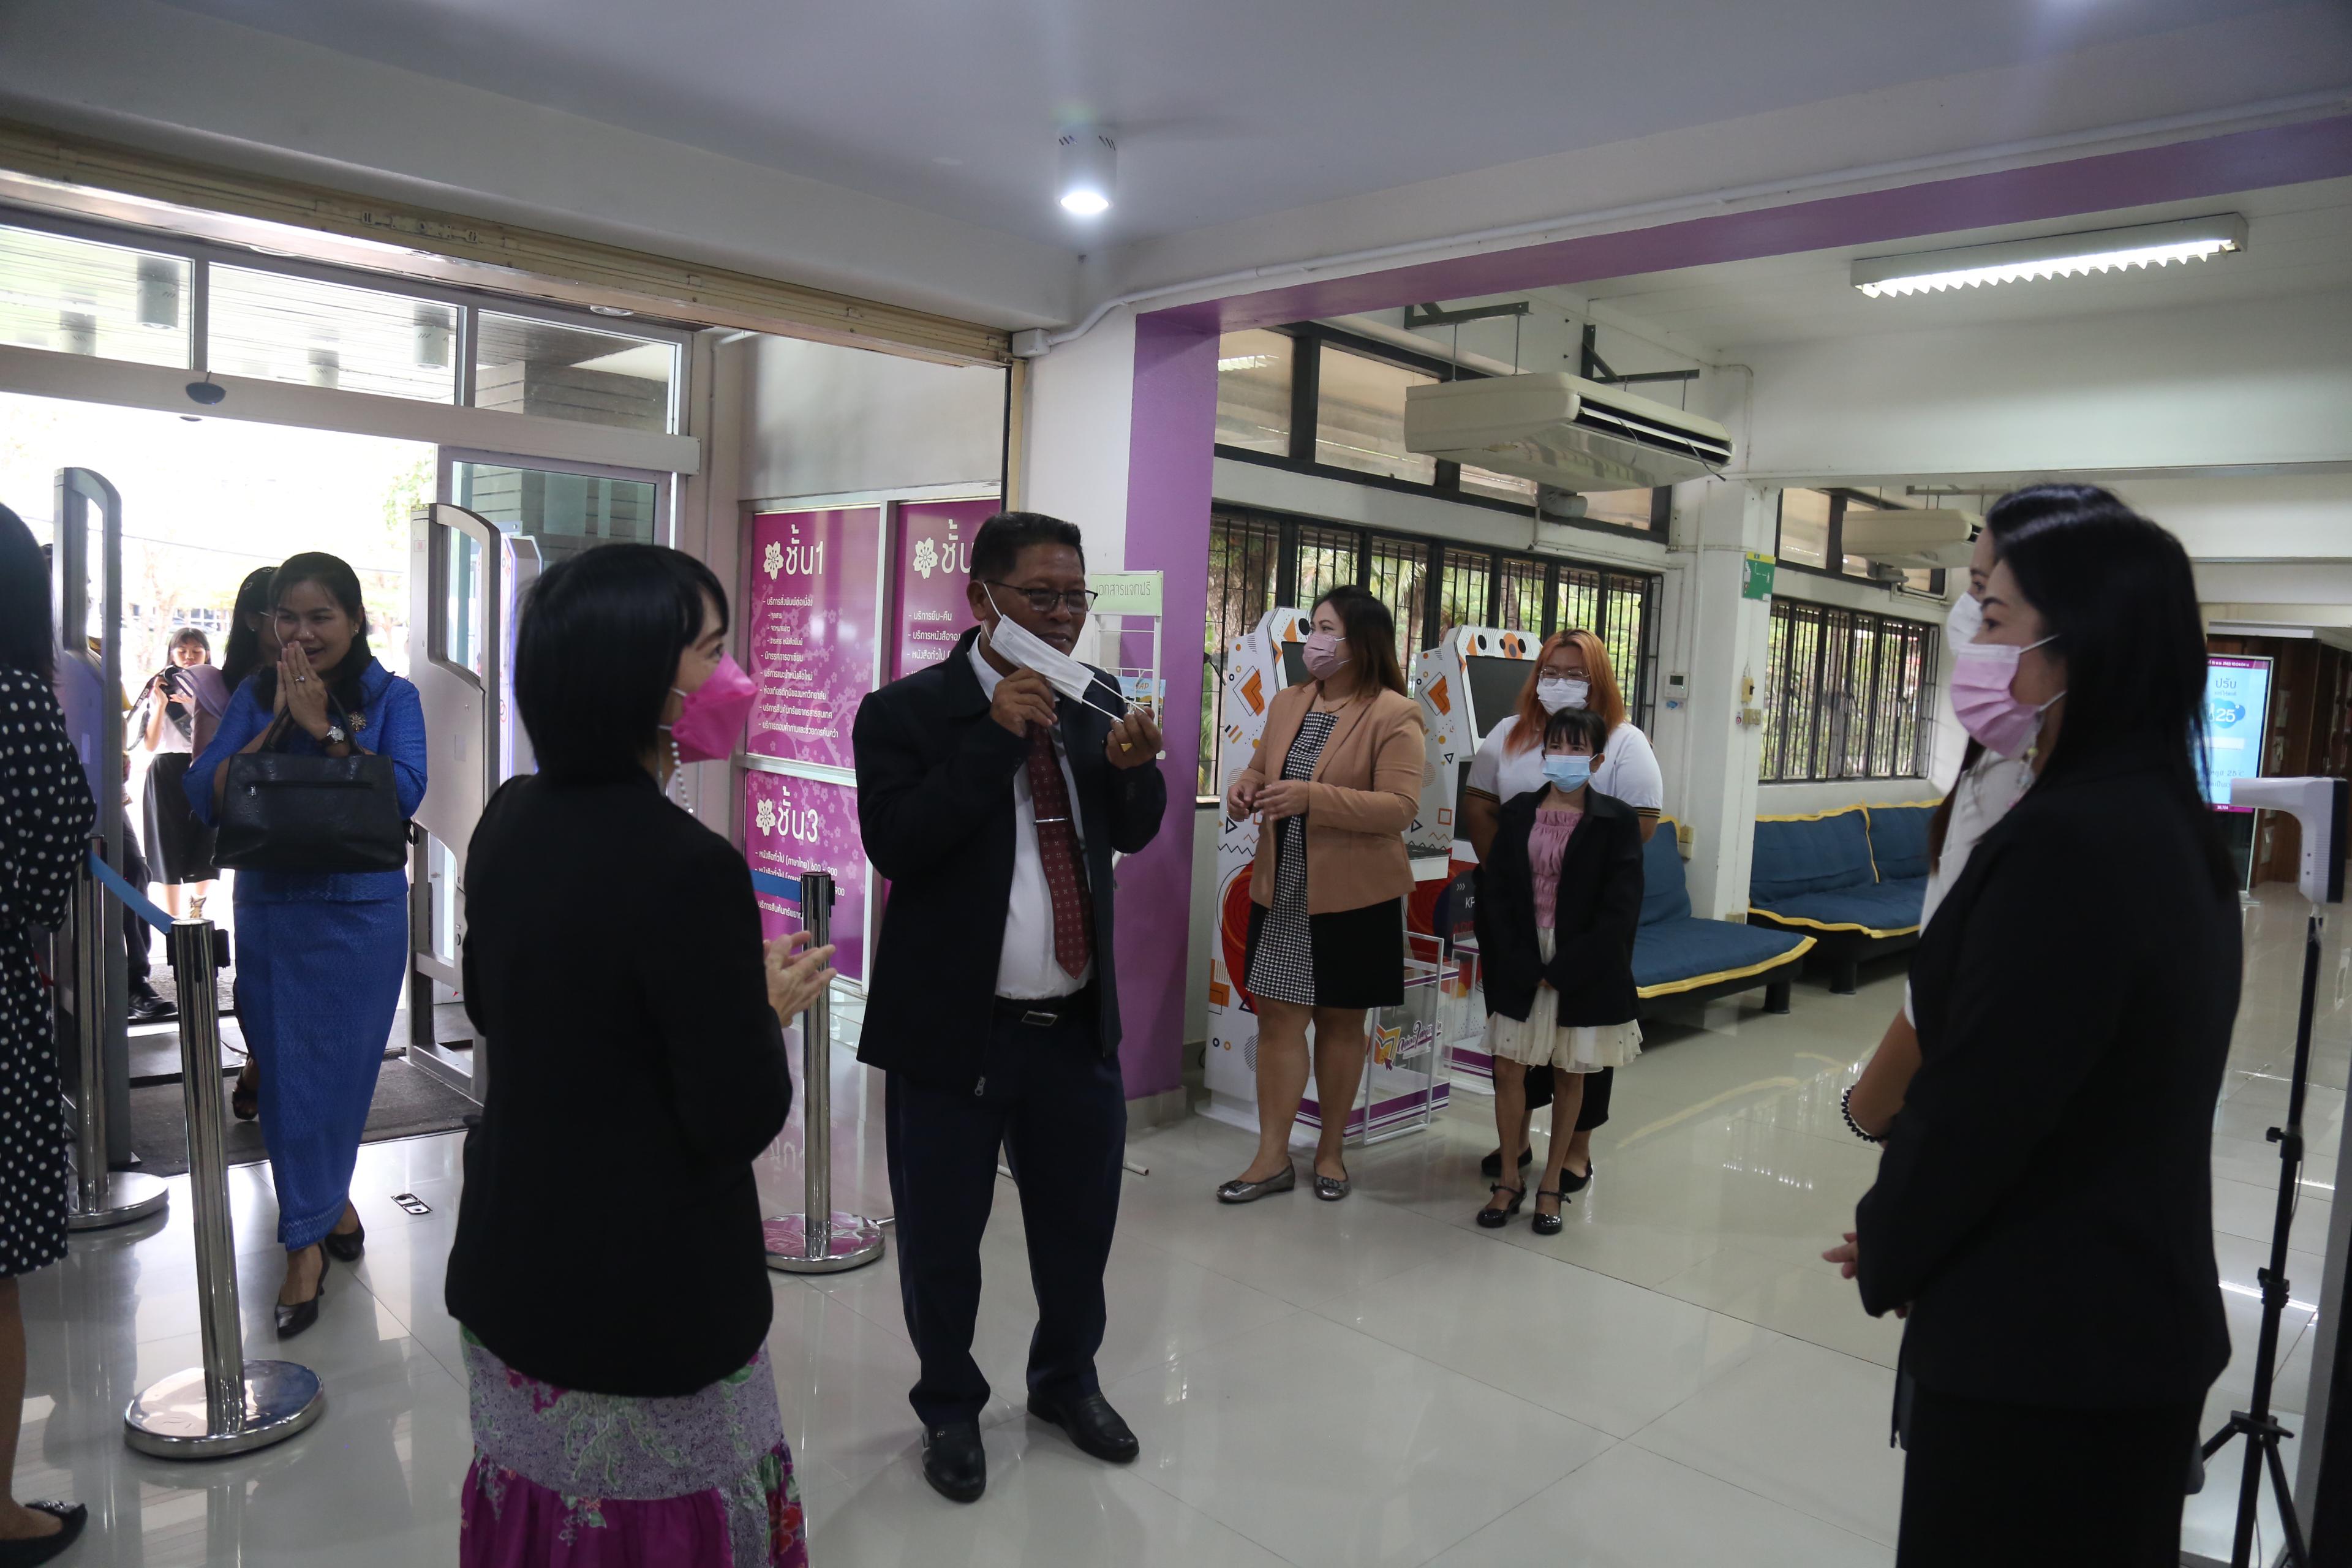 2. WELCOME KINGDOM OF CAMBODIA PROVINCIAL TEACHER TRAINING COLLEGE TO OFFICE OF ACADEMIC RESOURCES AND INFORMATION TECHNOLOGY KAMPHAENG PHET RAJABHAT UNIVERSITY